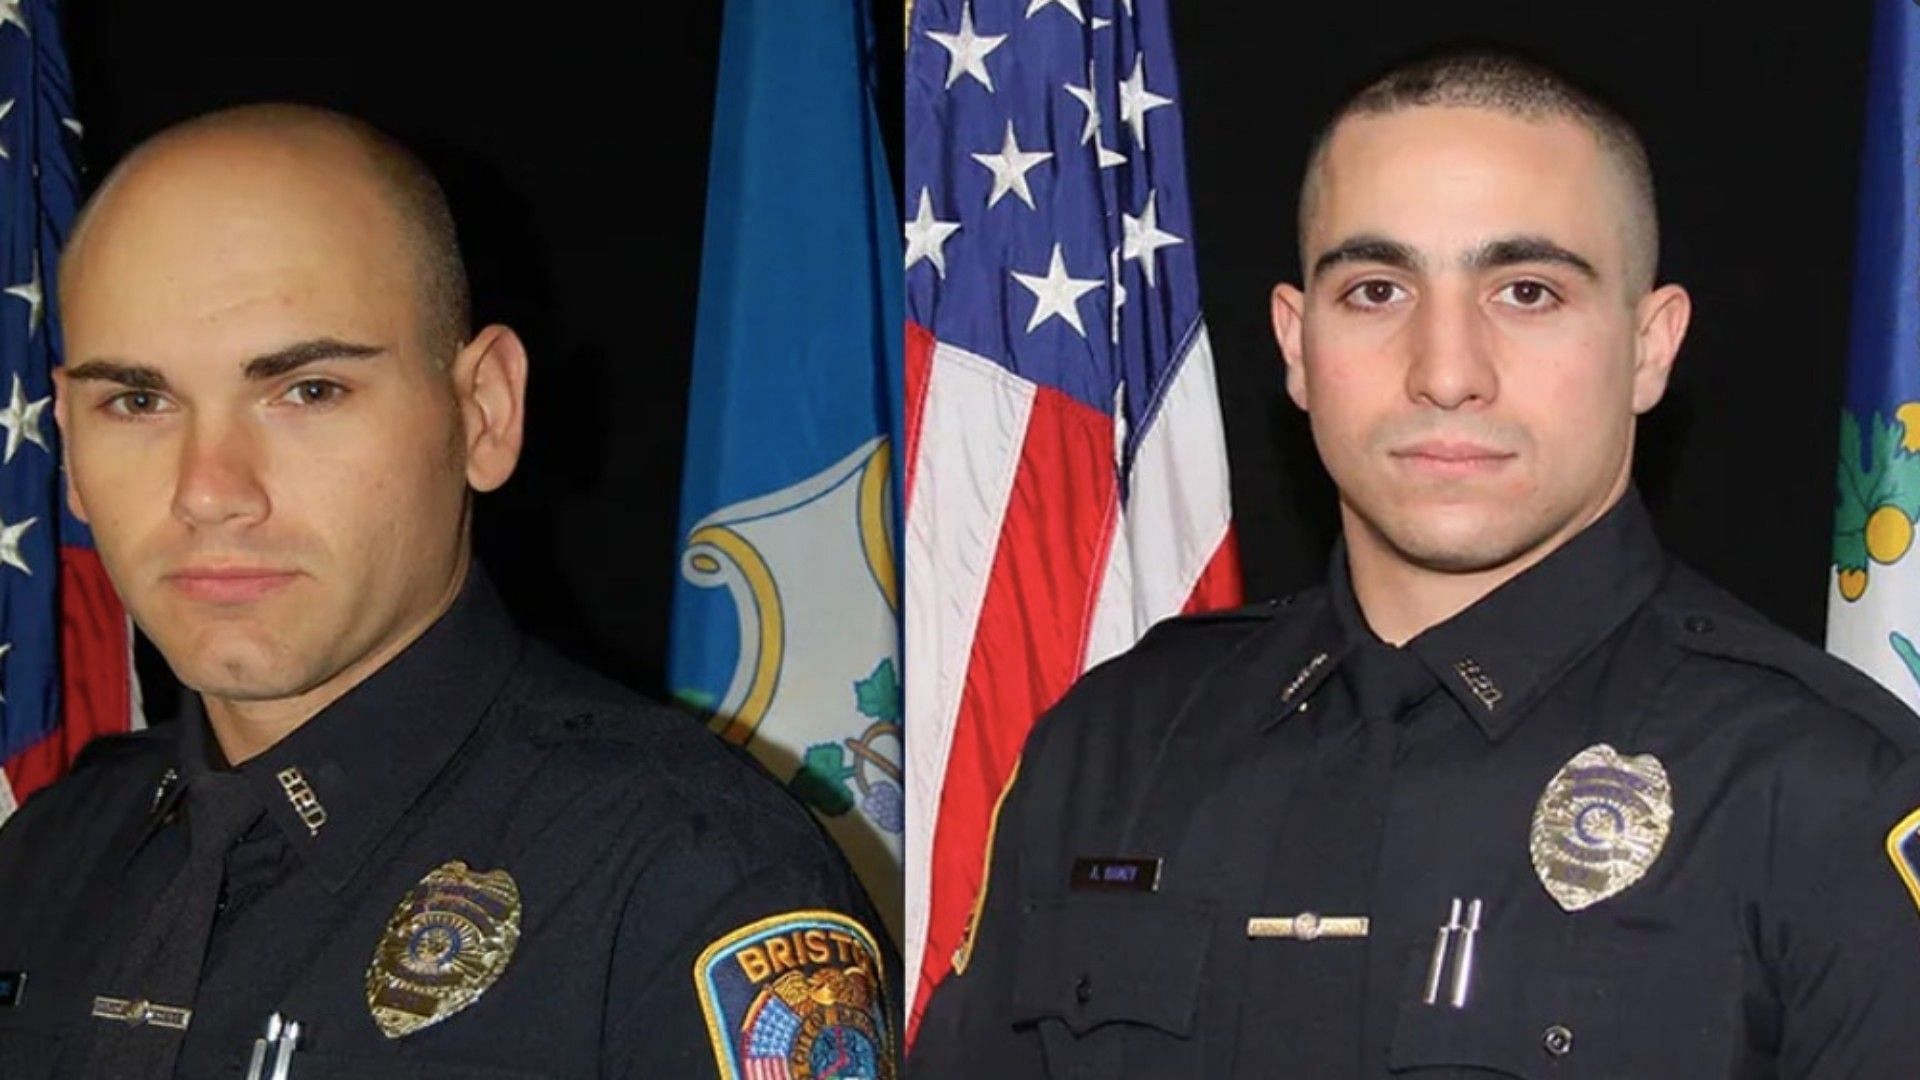 Two Two Bristol police officers were fatally shot on October 12 (Image via South Kingstown Police Department/Twitter)